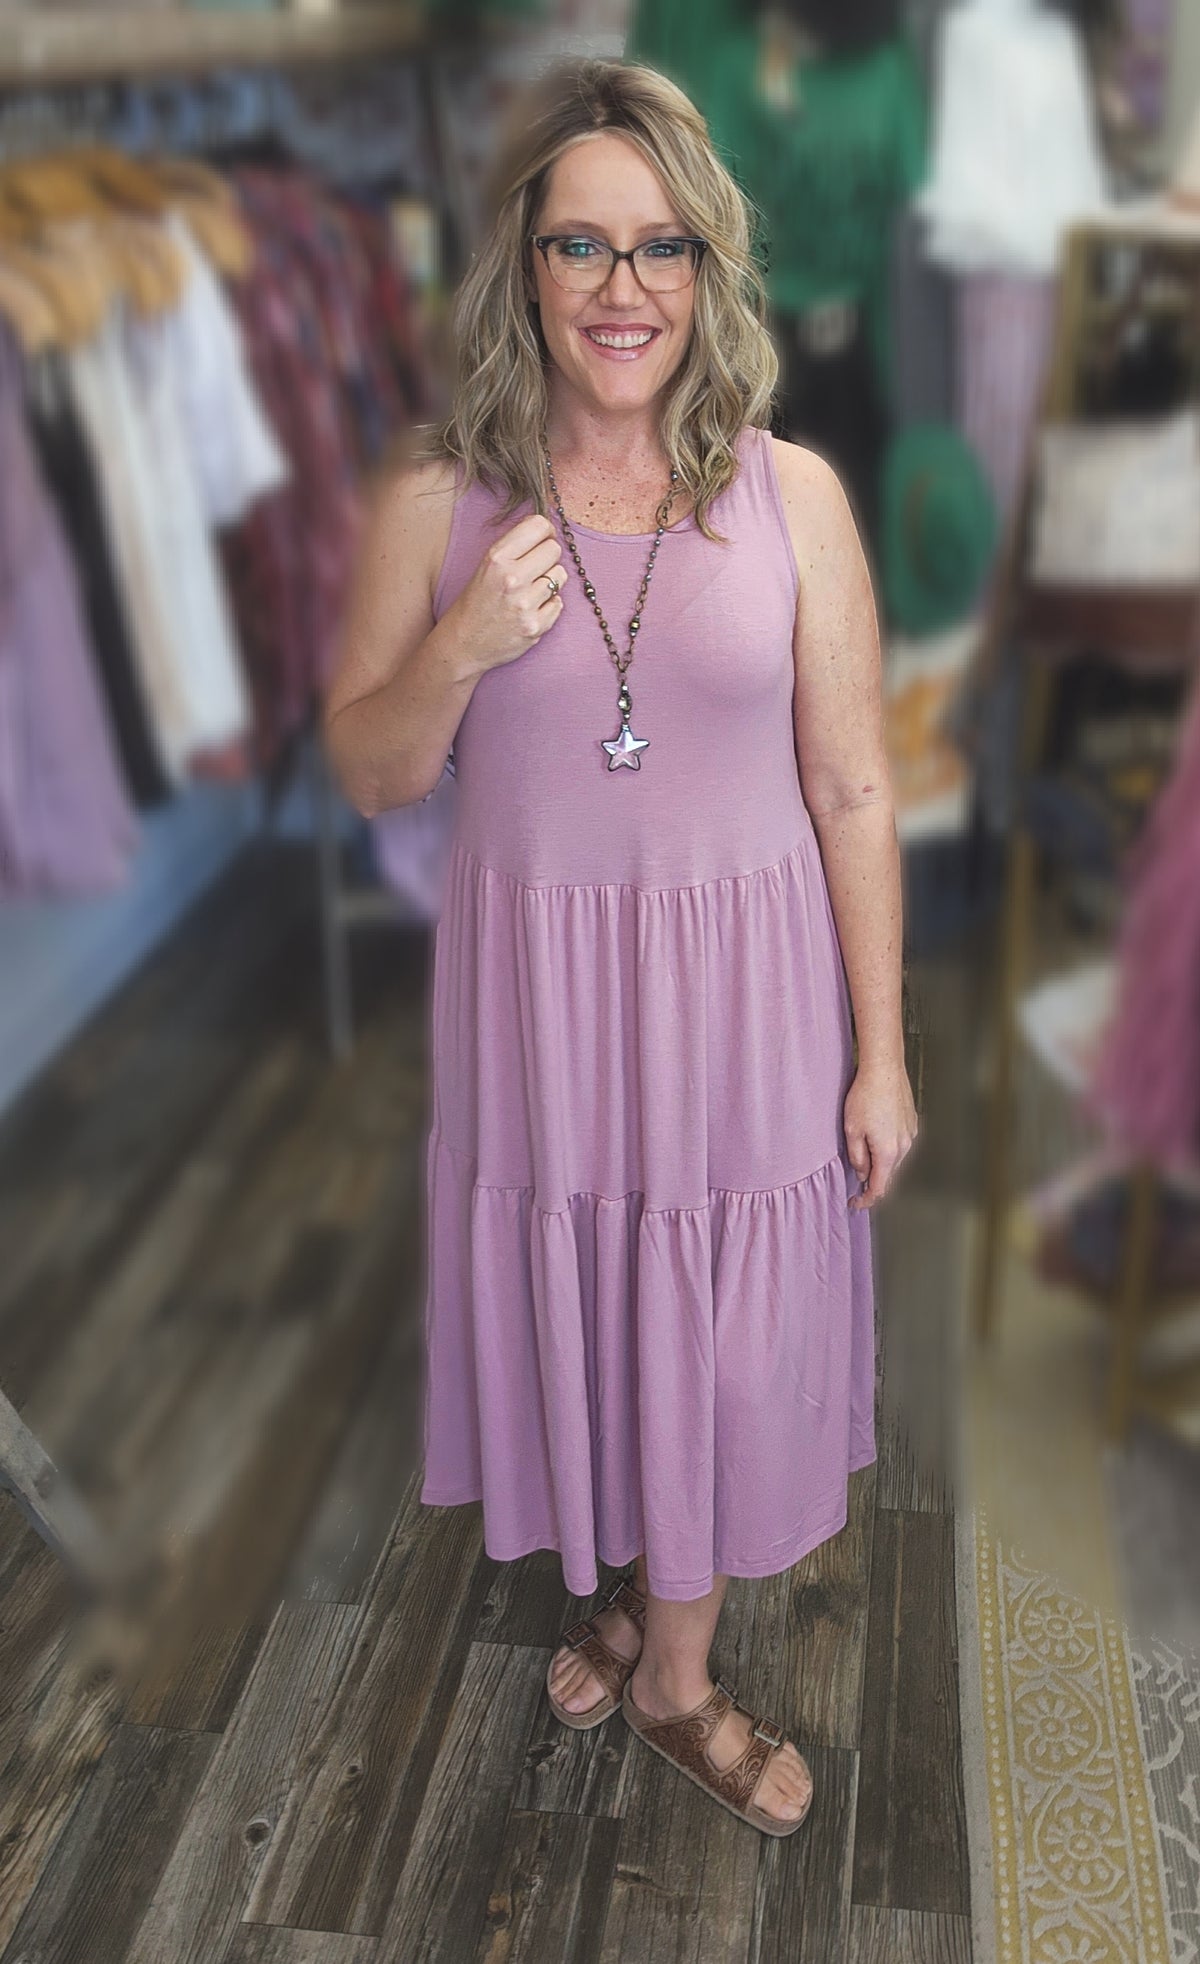 Sunny Day Dress in Pastel Pink XL - 3XL